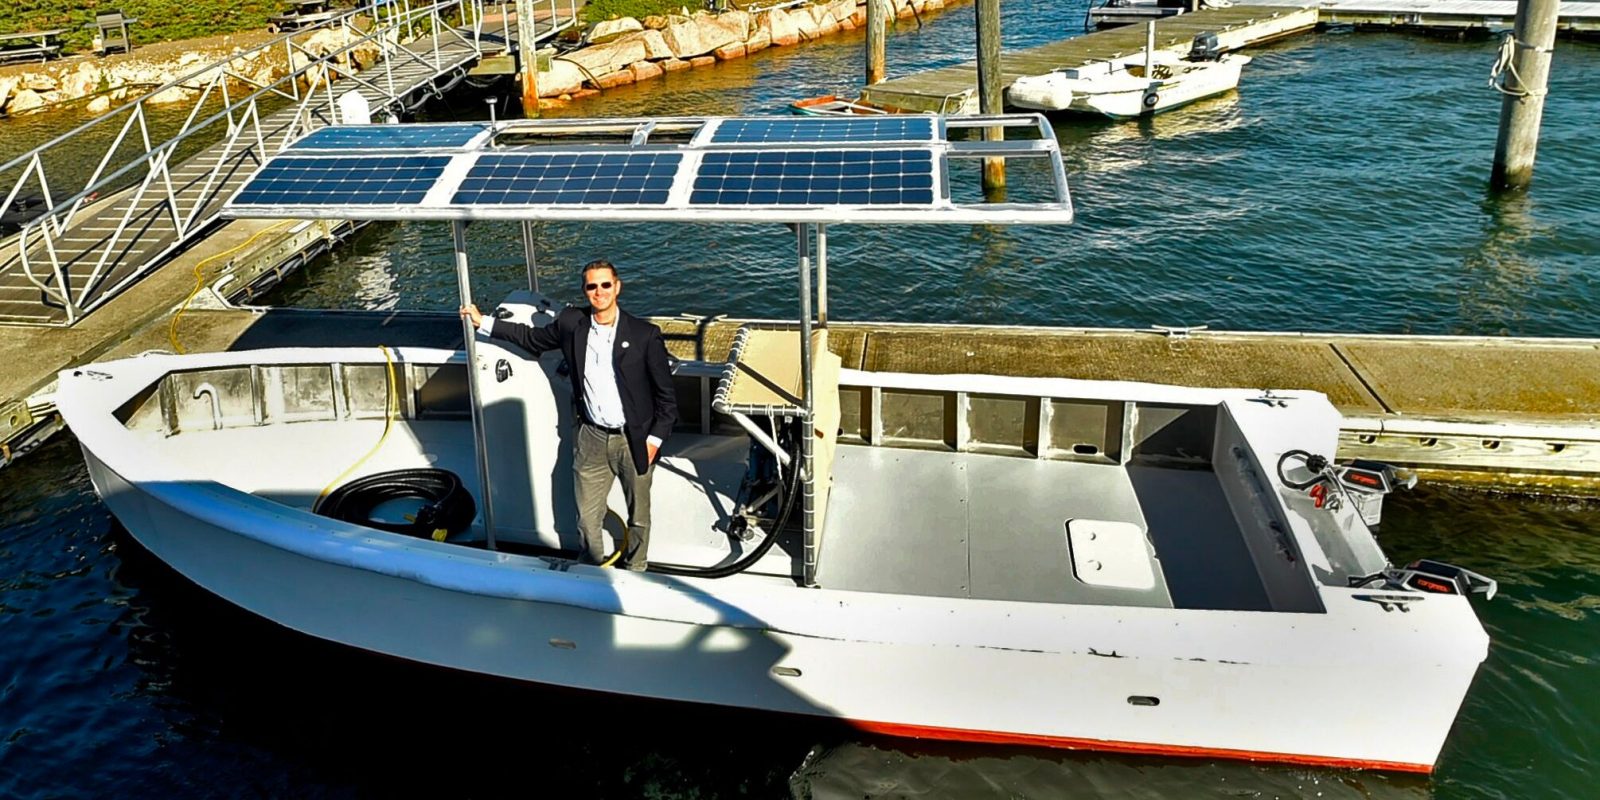 solar power sewage pump-out boat